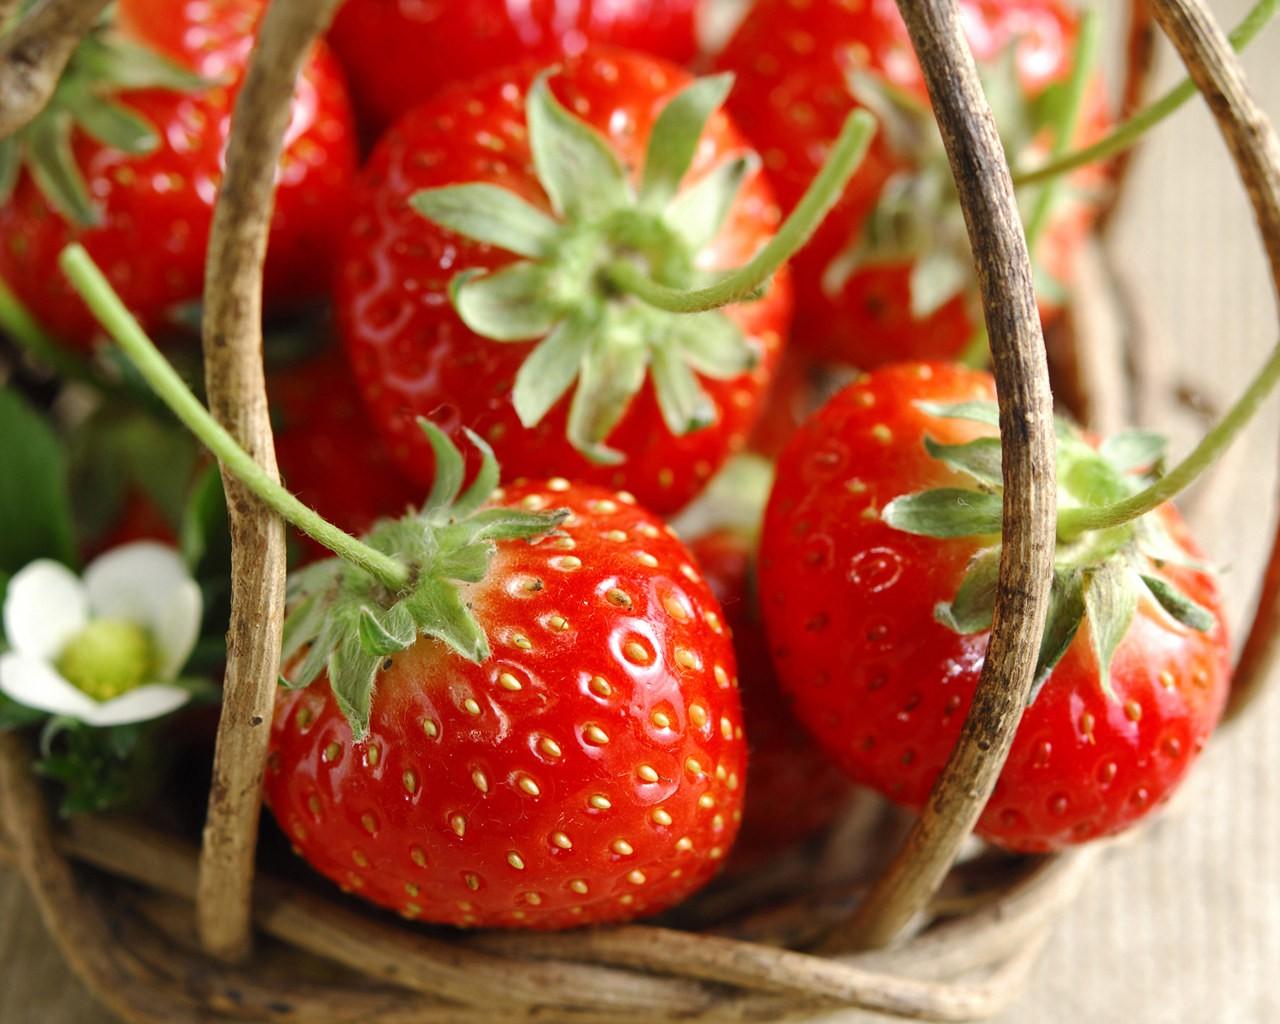 Wallpaper Tagged With Strawberries: Fruit Strawberries Fresh